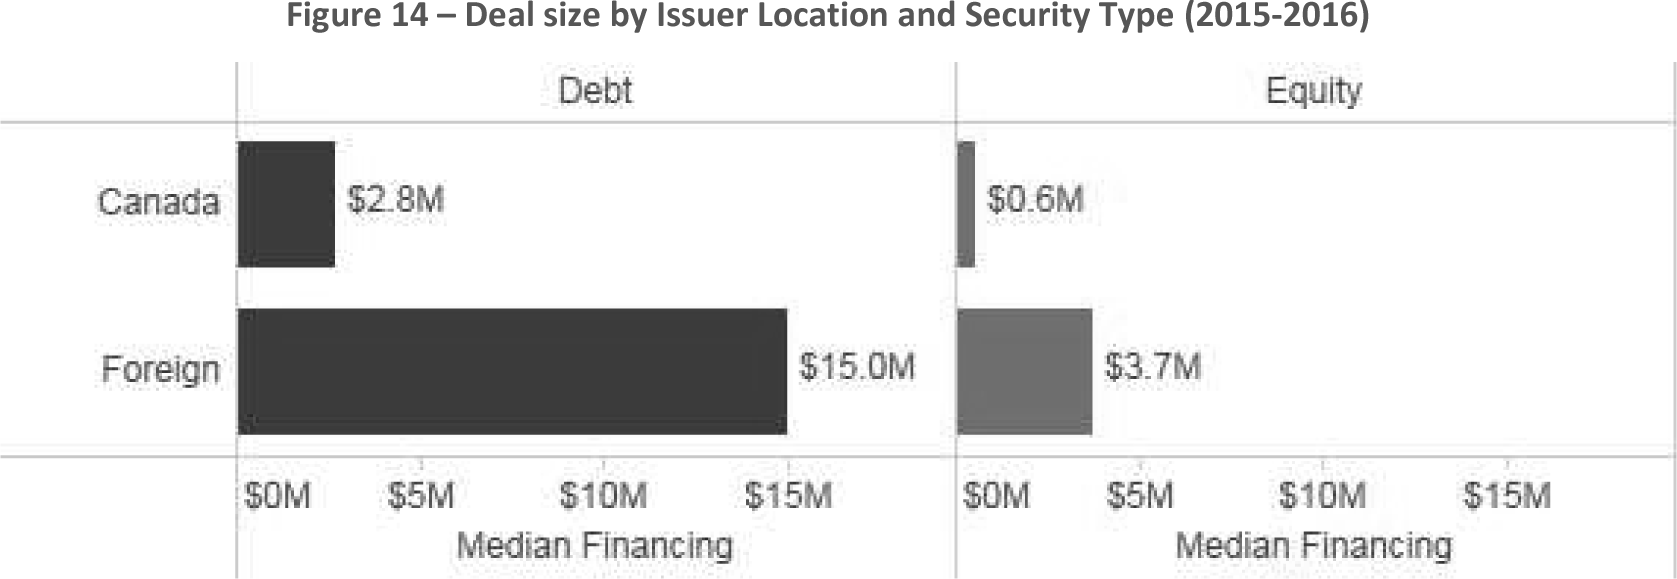 Figure 14 -- Deal size by Issuer Location and Security Type (2015-2016)